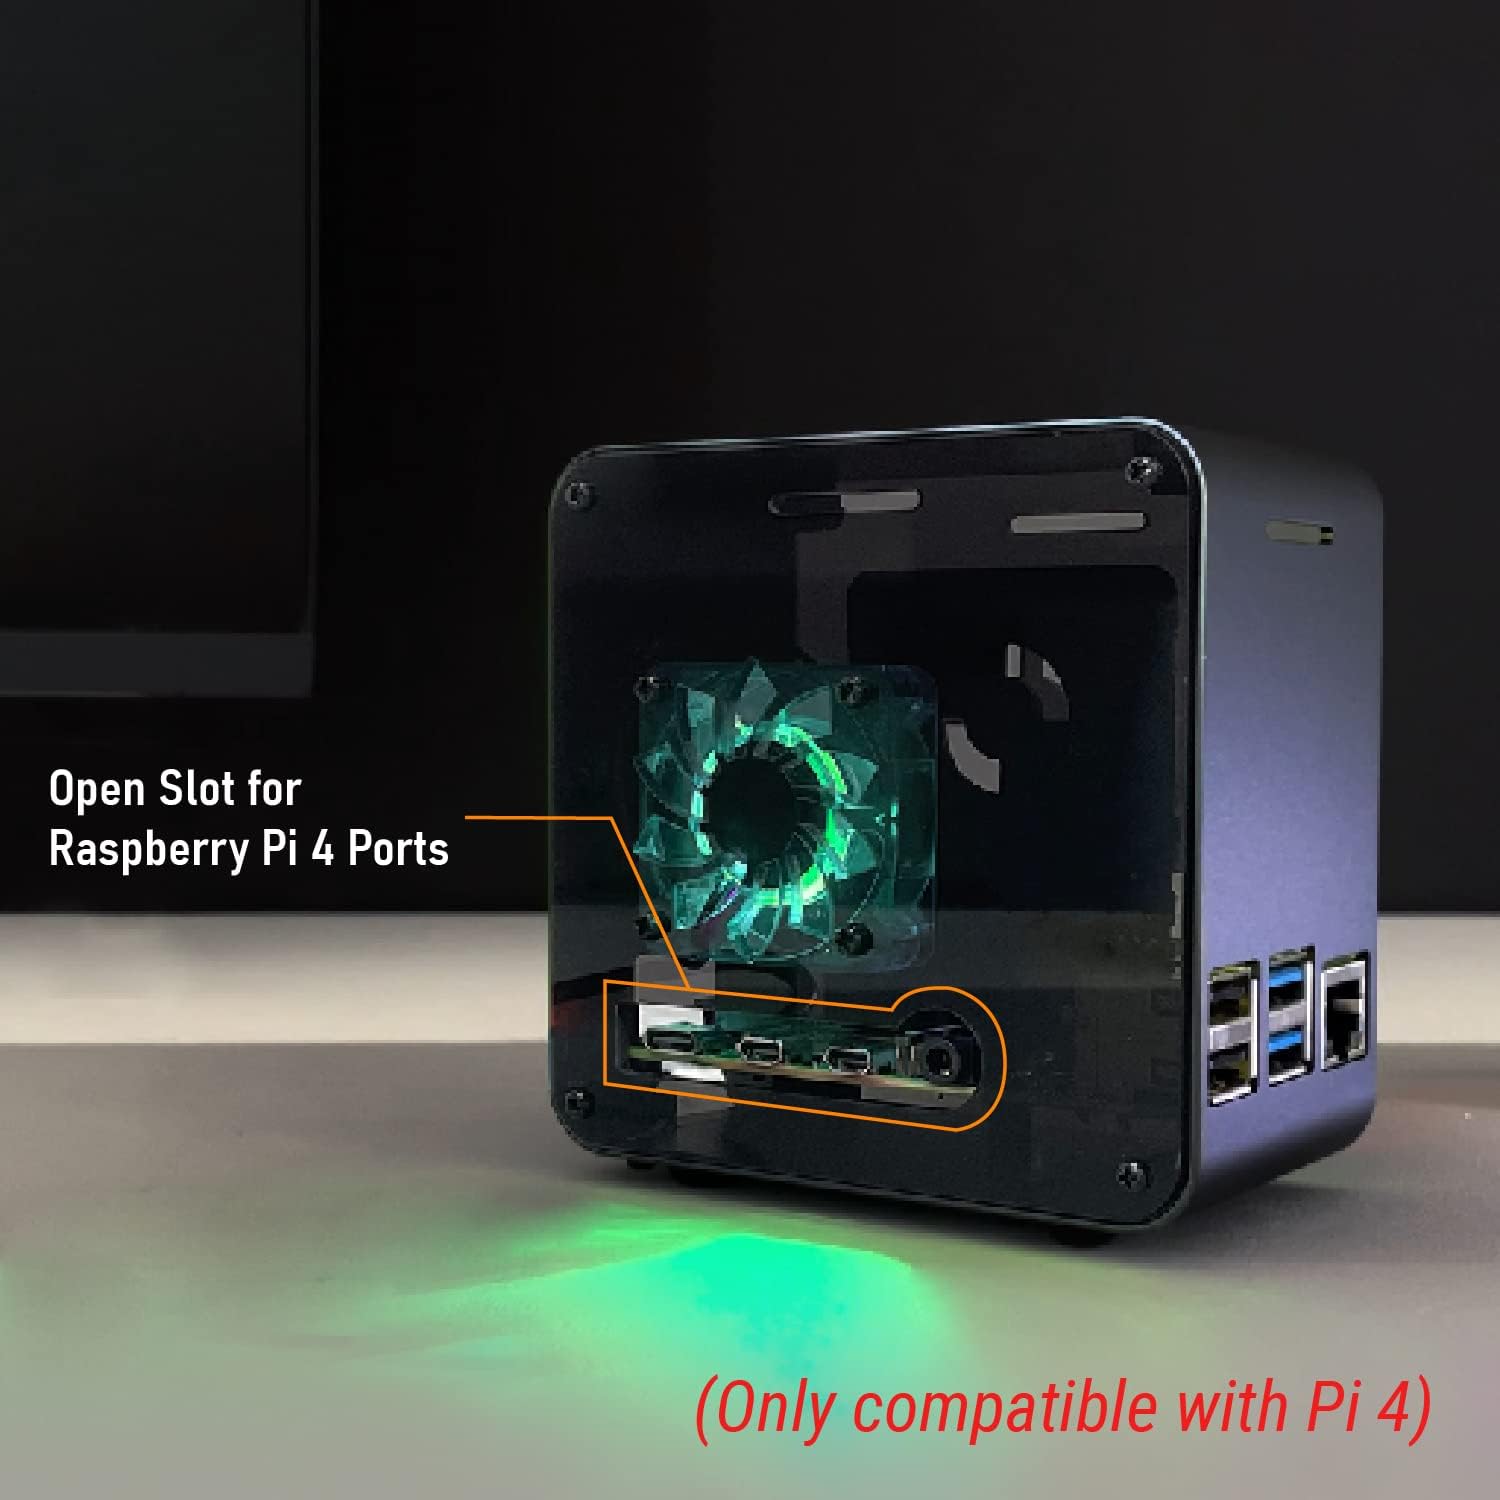 ElectroCookie Raspberry Pi 4 Case, Aluminum Mini Tower Case with Cooling Fan and Color Changing Ambient Light (Matte Black  Dark Gray)